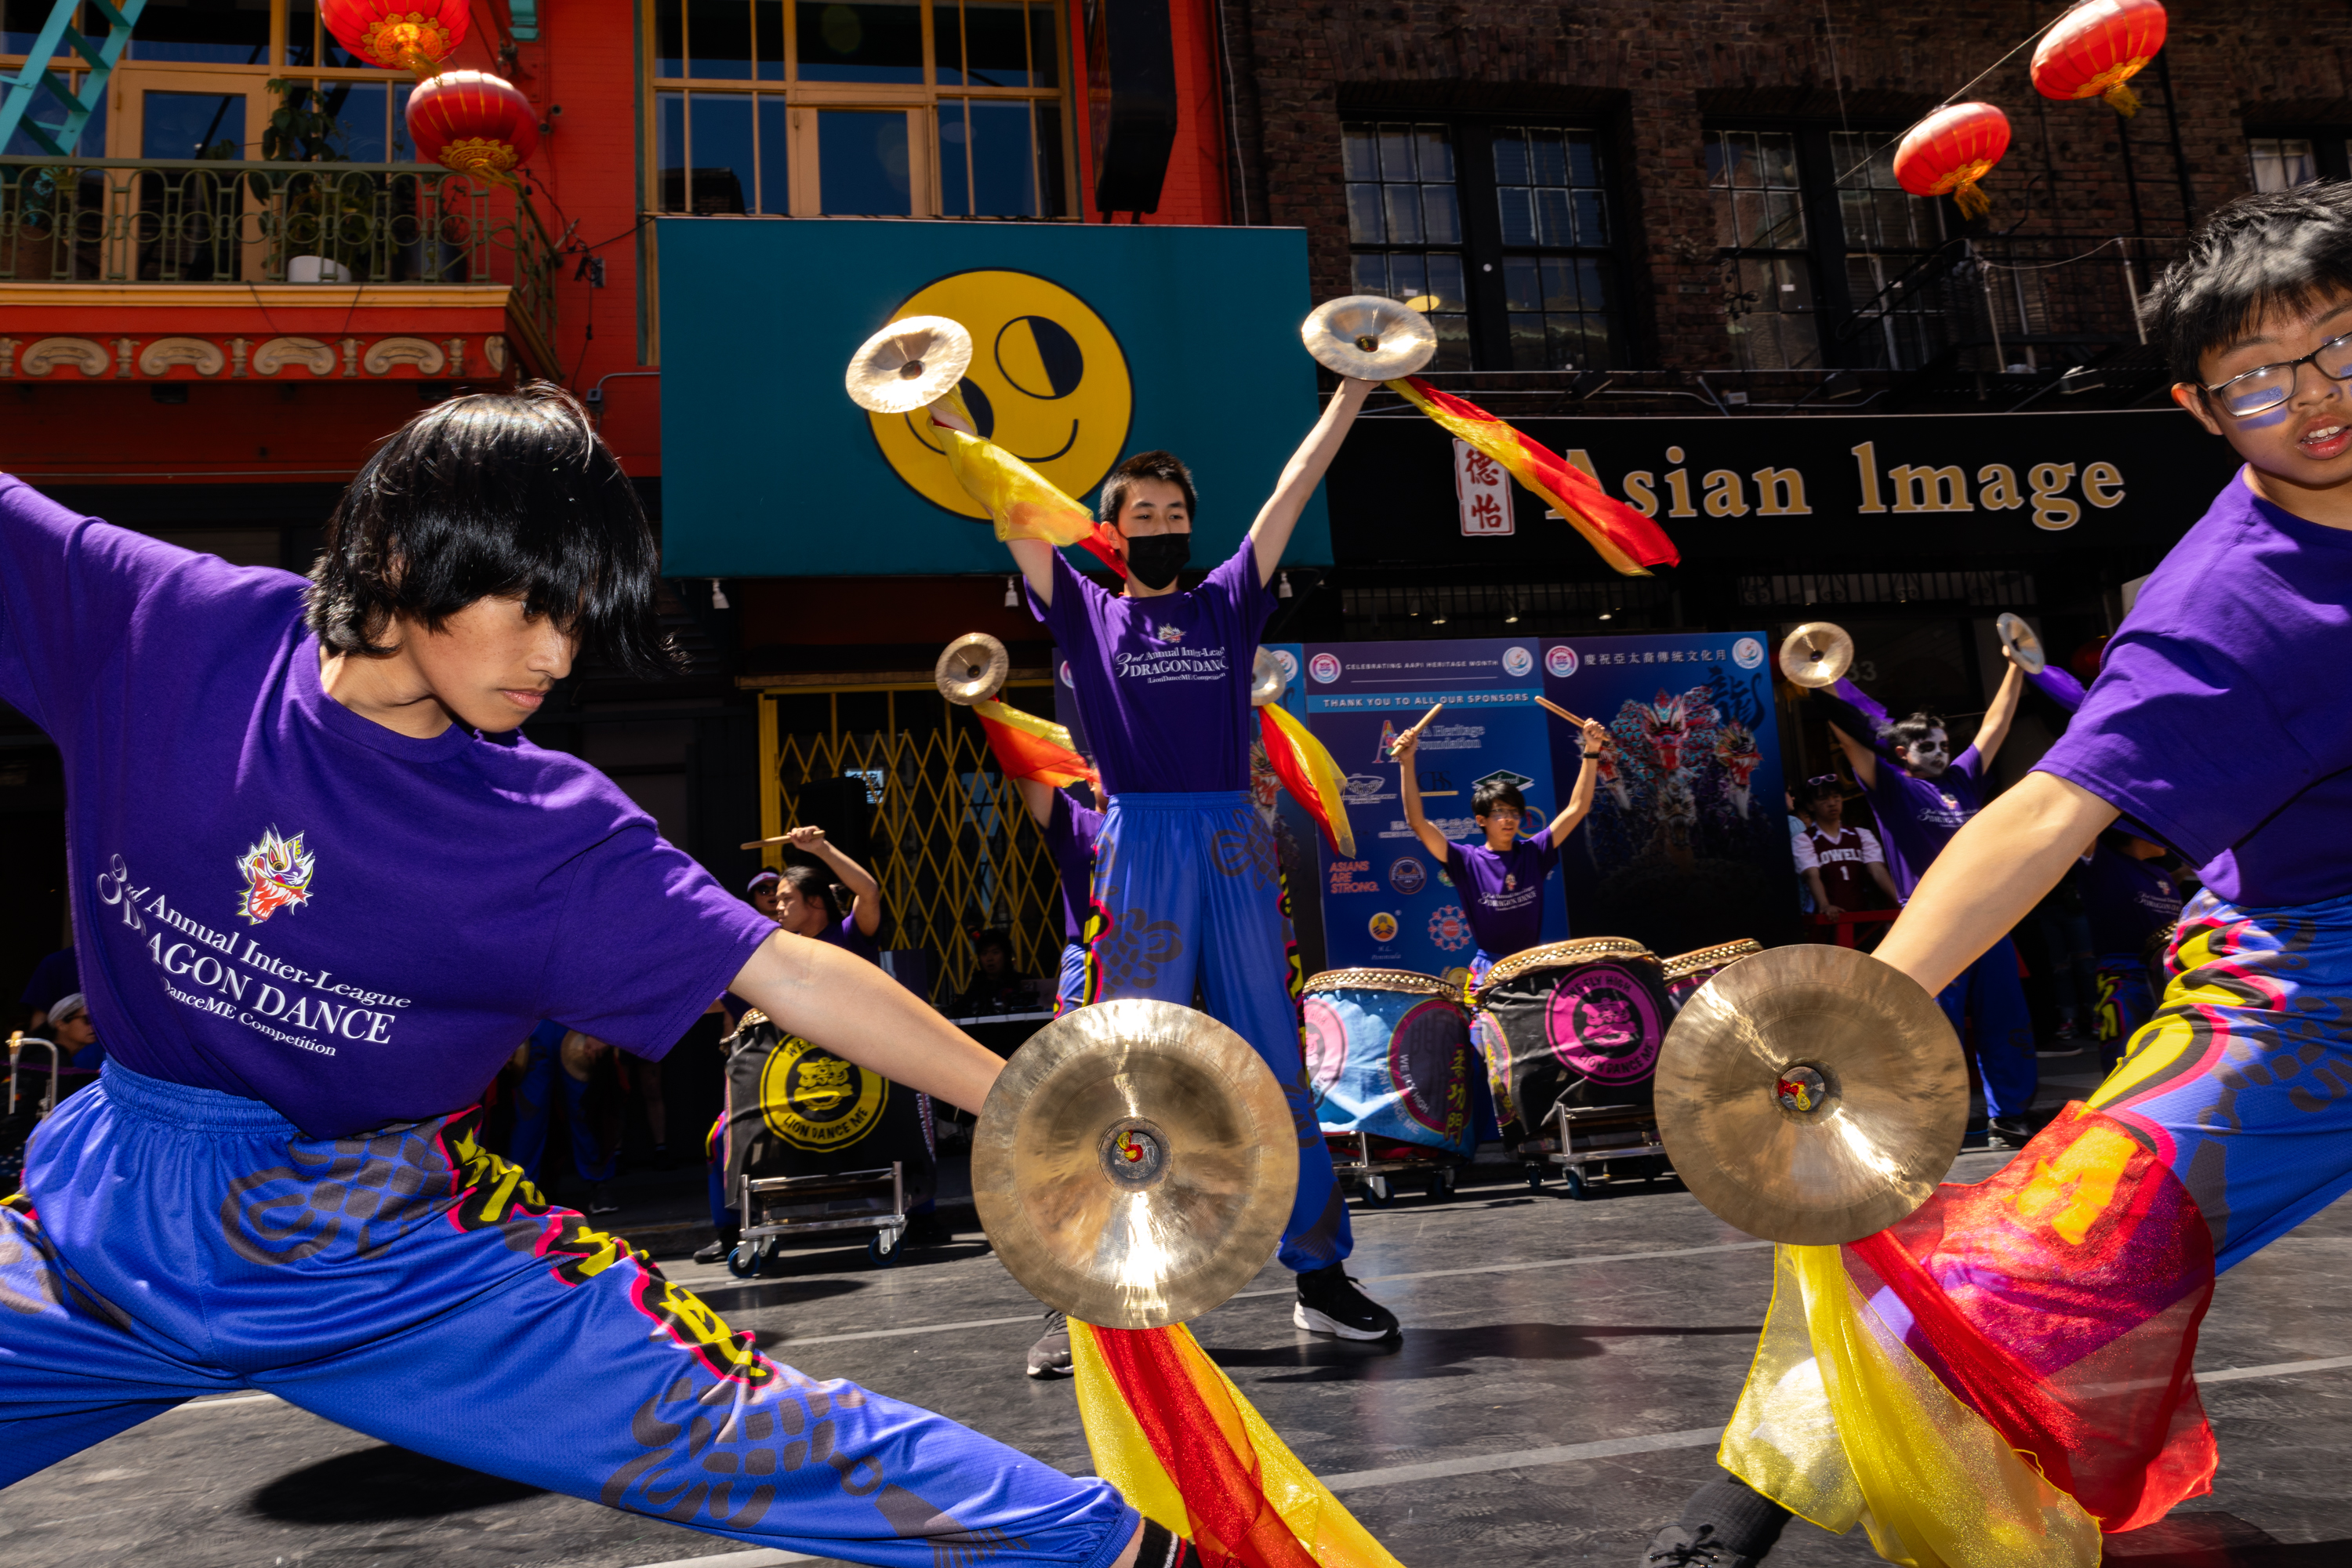 Performers in purple outfits with cymbals dance in a vibrant street celebration, backed by smiling sun decor.